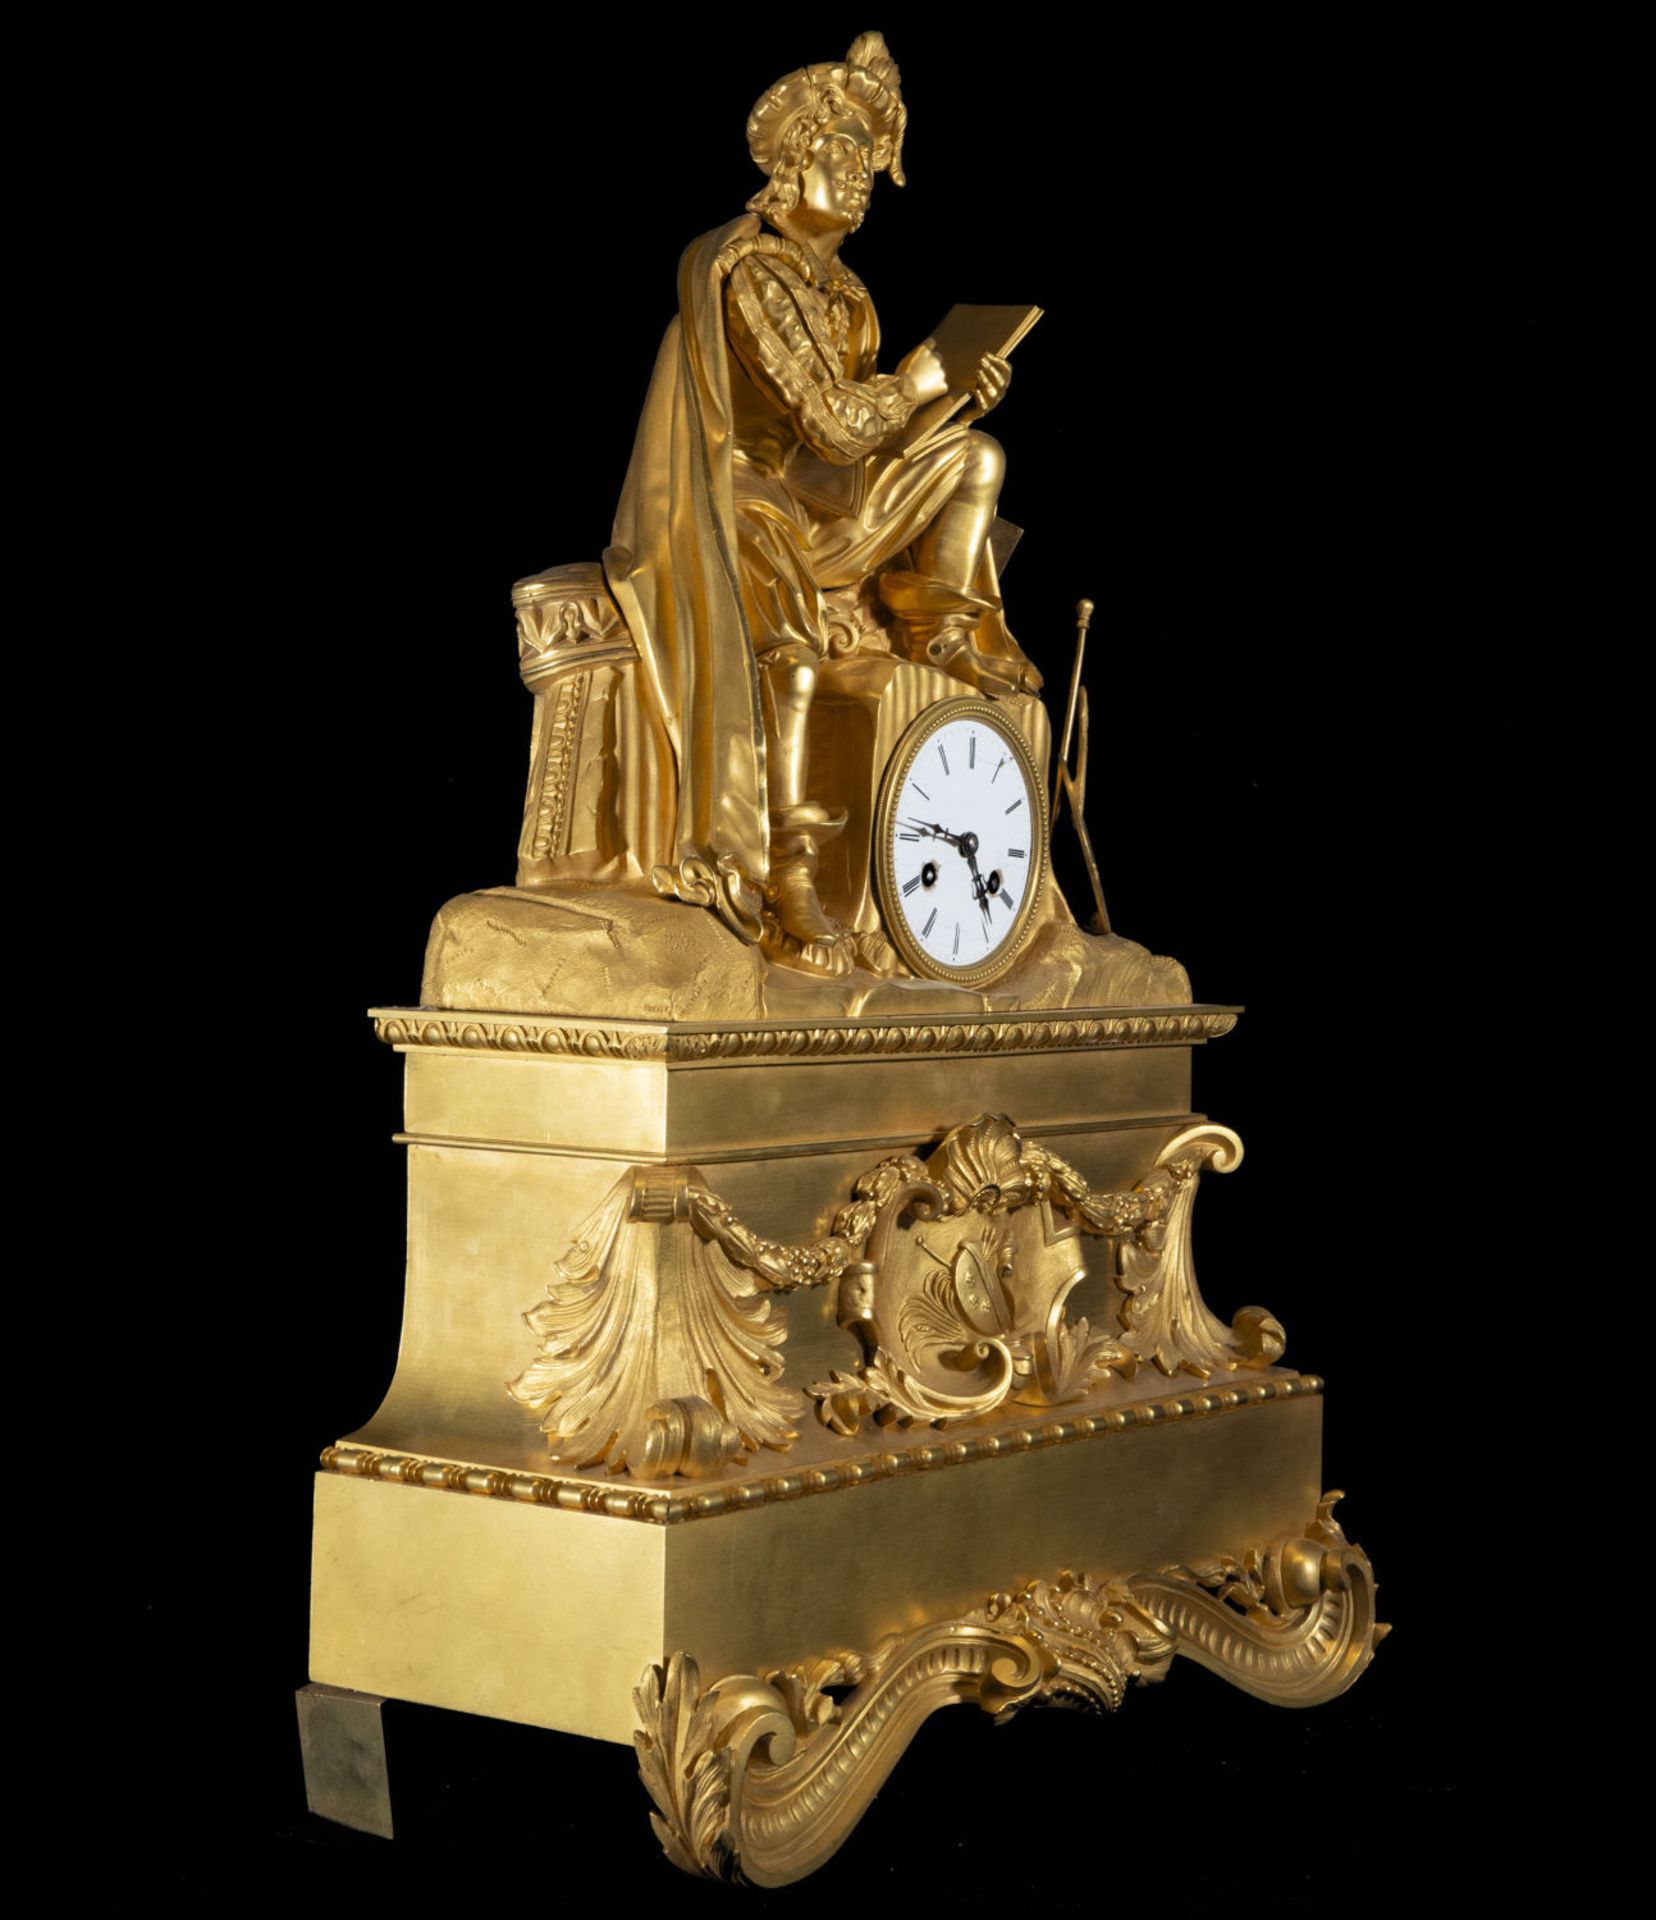 Large Empire table clock with the motif of Michelangelo Buonarroti, 19th century French school - Image 6 of 8